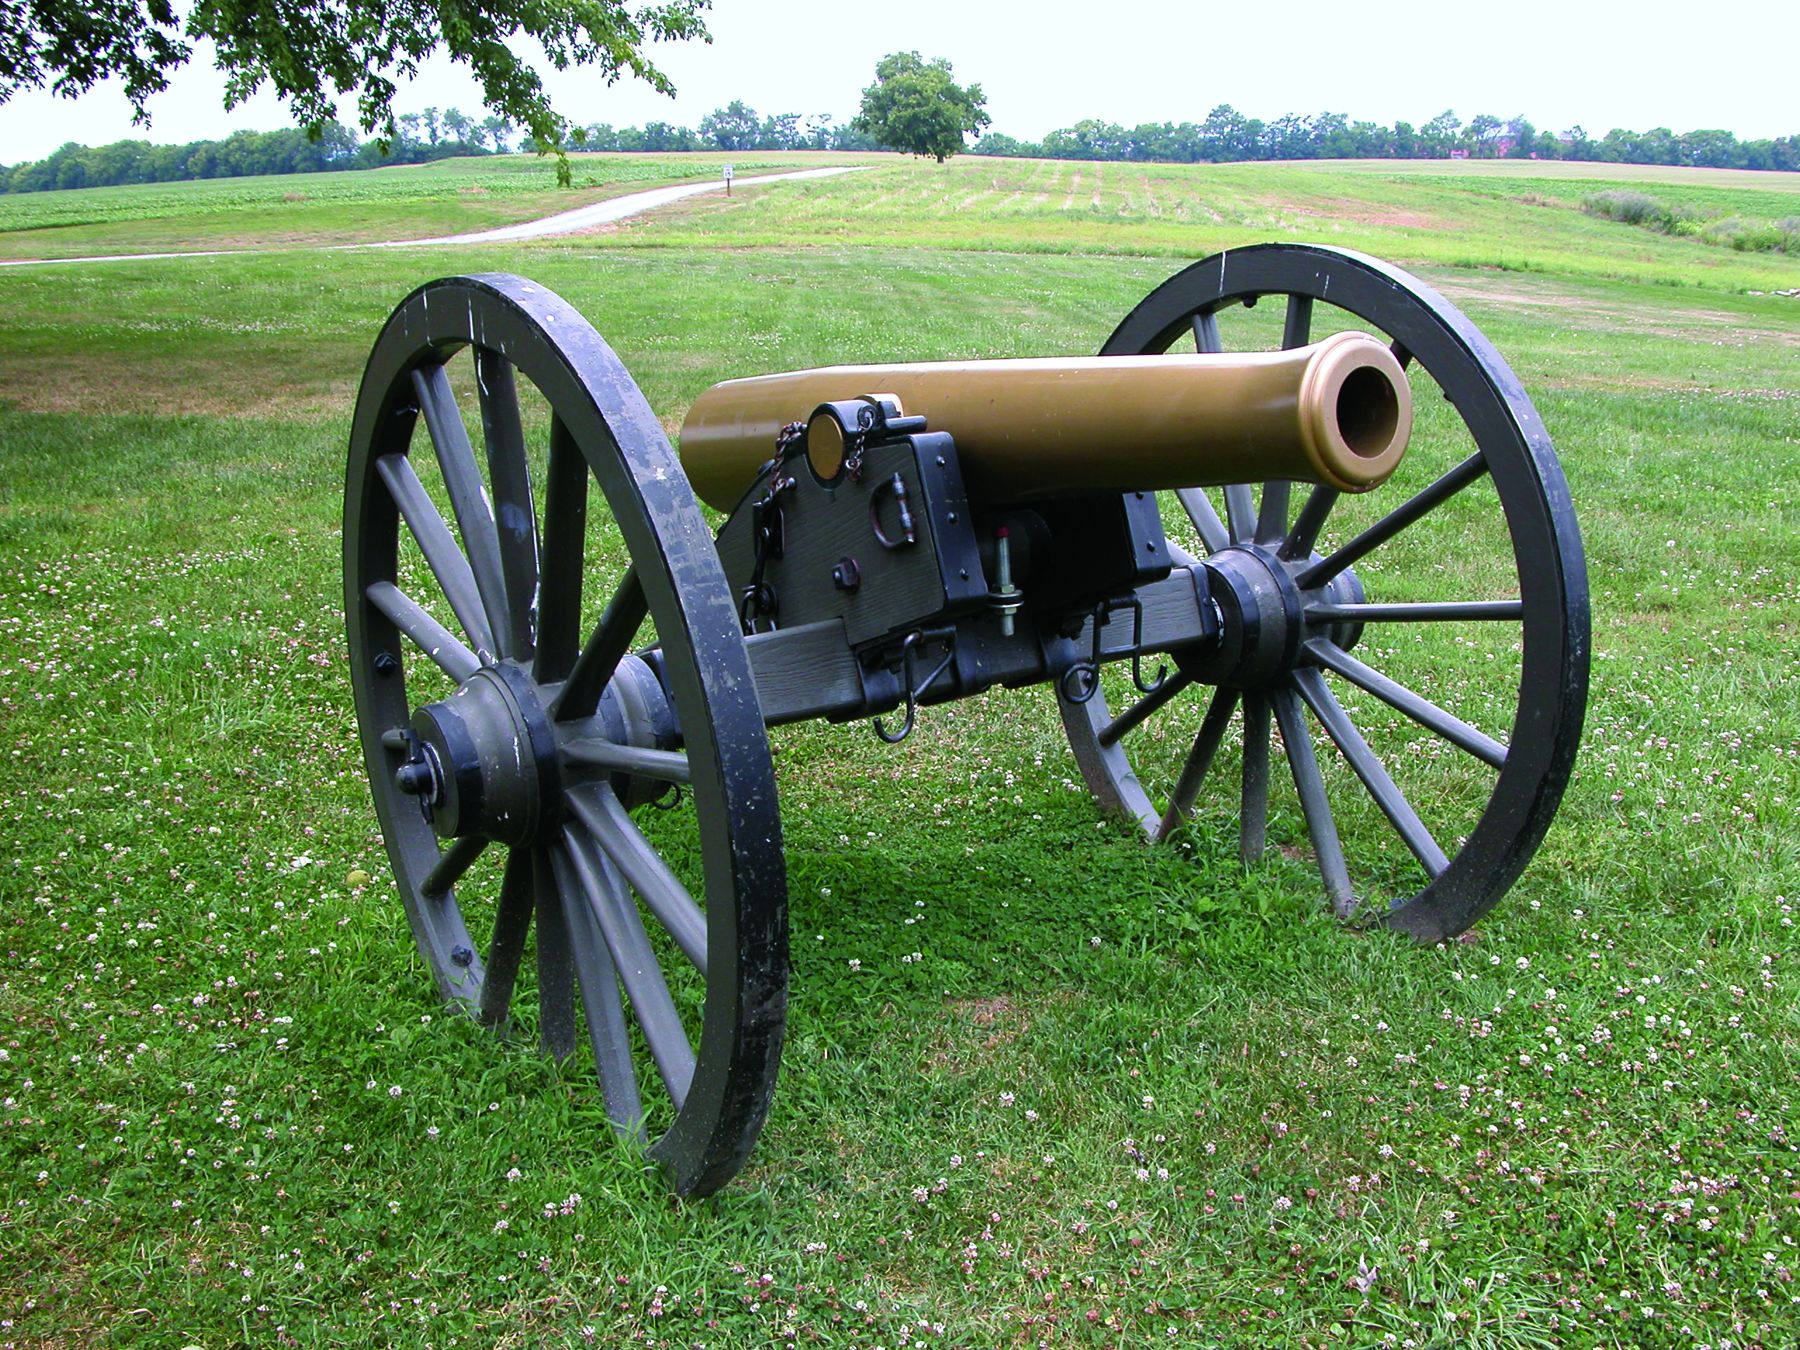 A 12-pounder Napoleon at the Best Farm, Monocacy National Battlefield, Maryland.